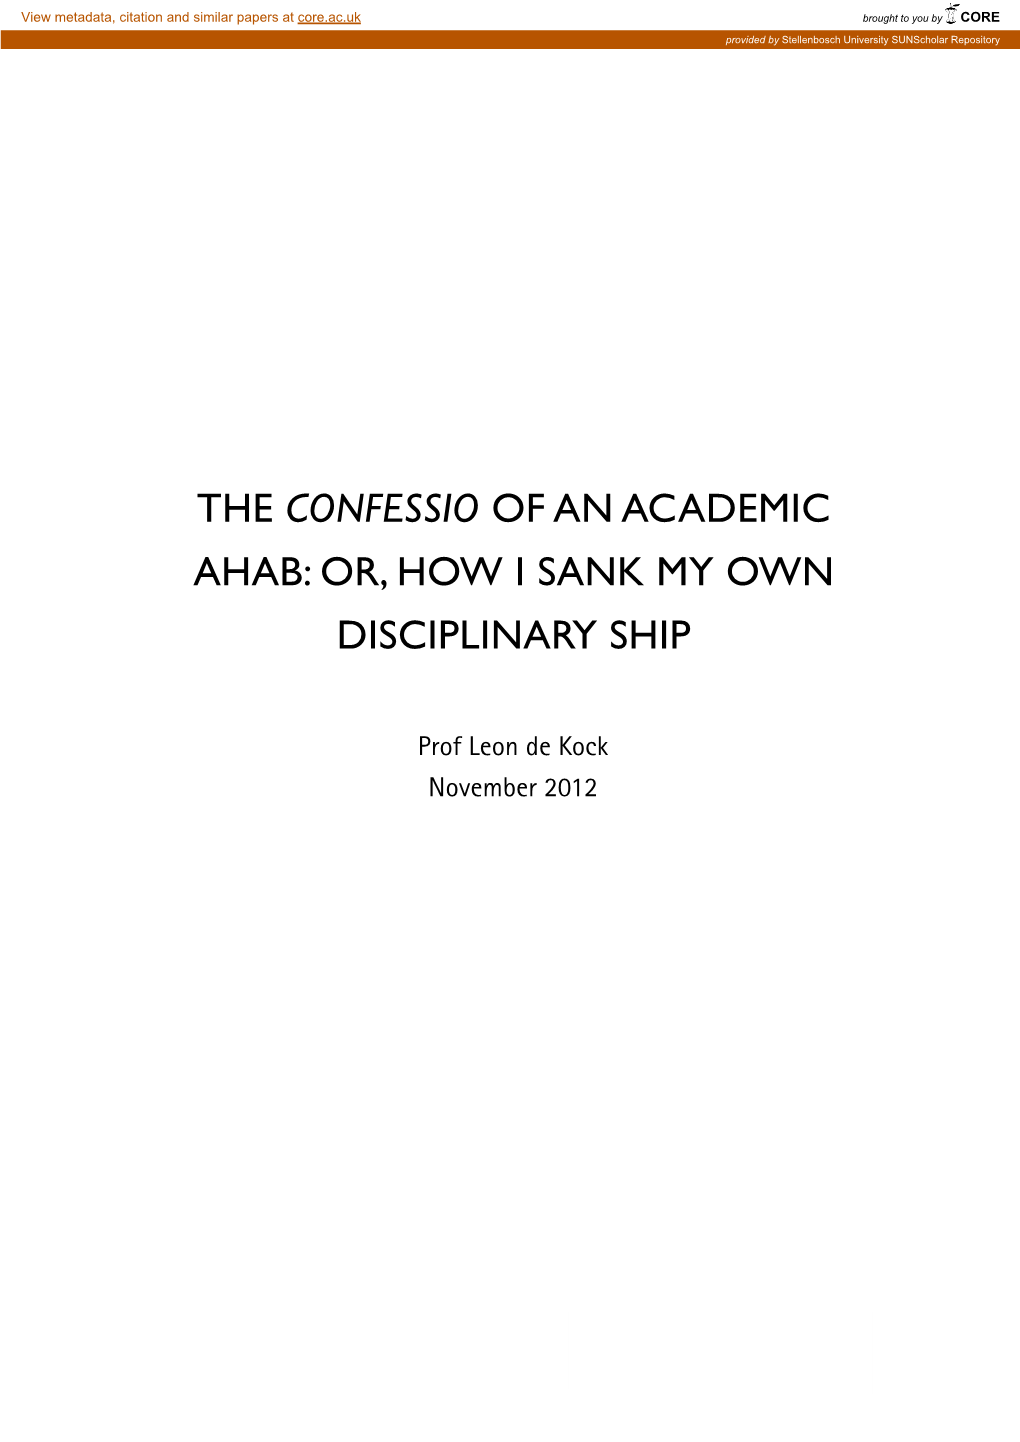 The Confessio of an Academic Ahab: Or, How I Sank My Own Disciplinary Ship